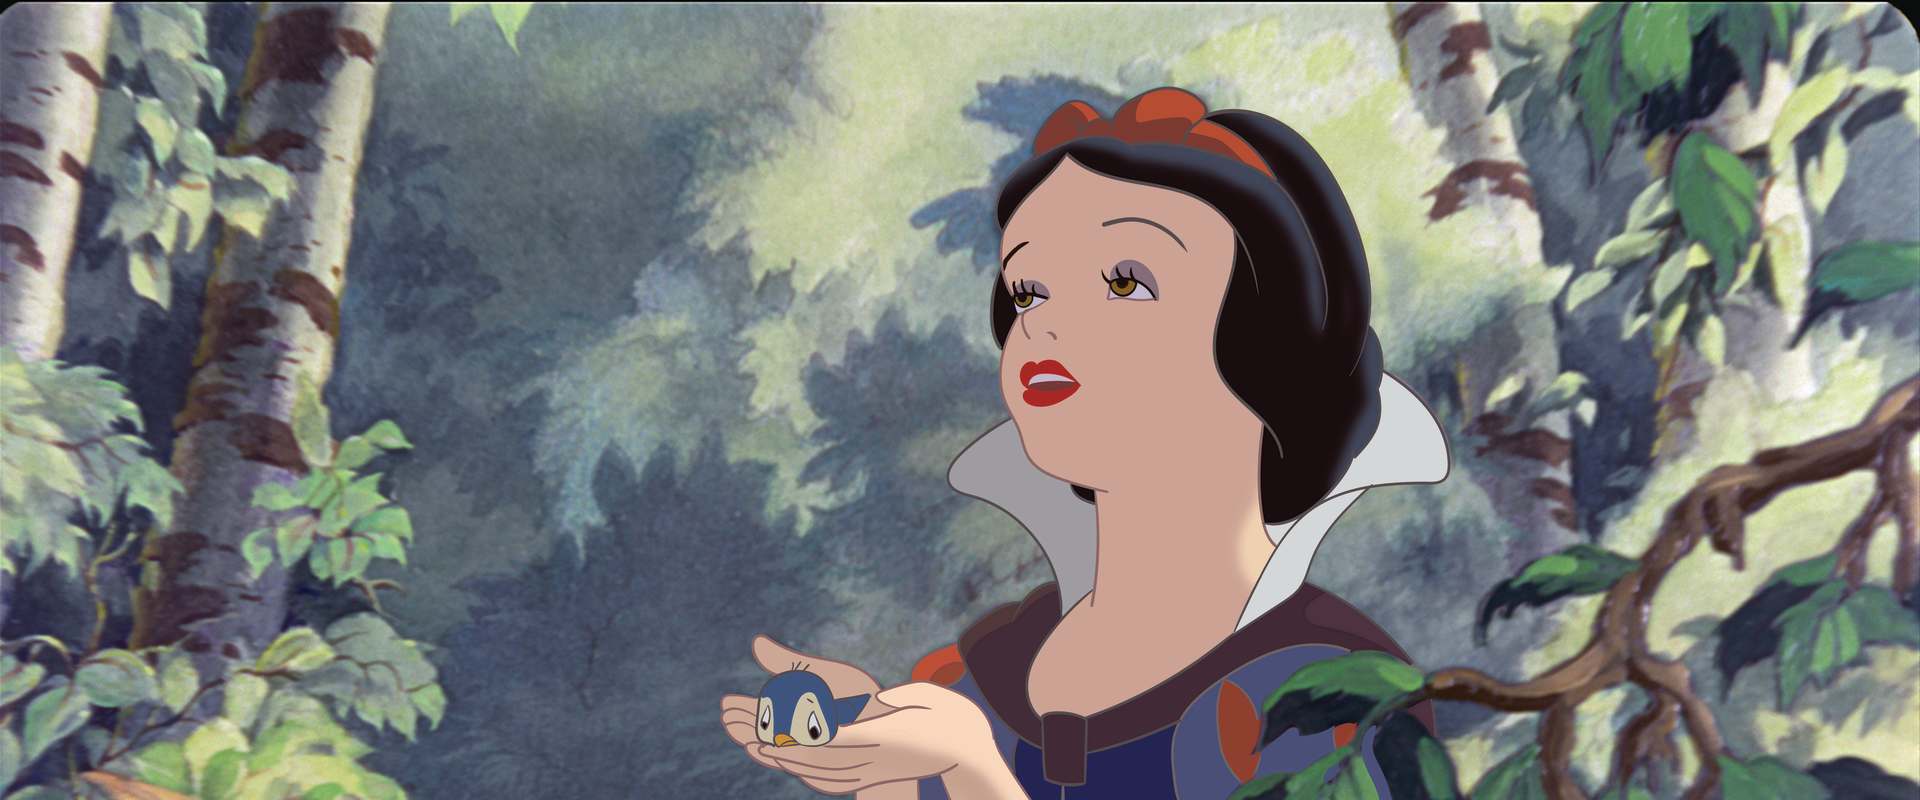 Snow White and the Seven Dwarfs background 2